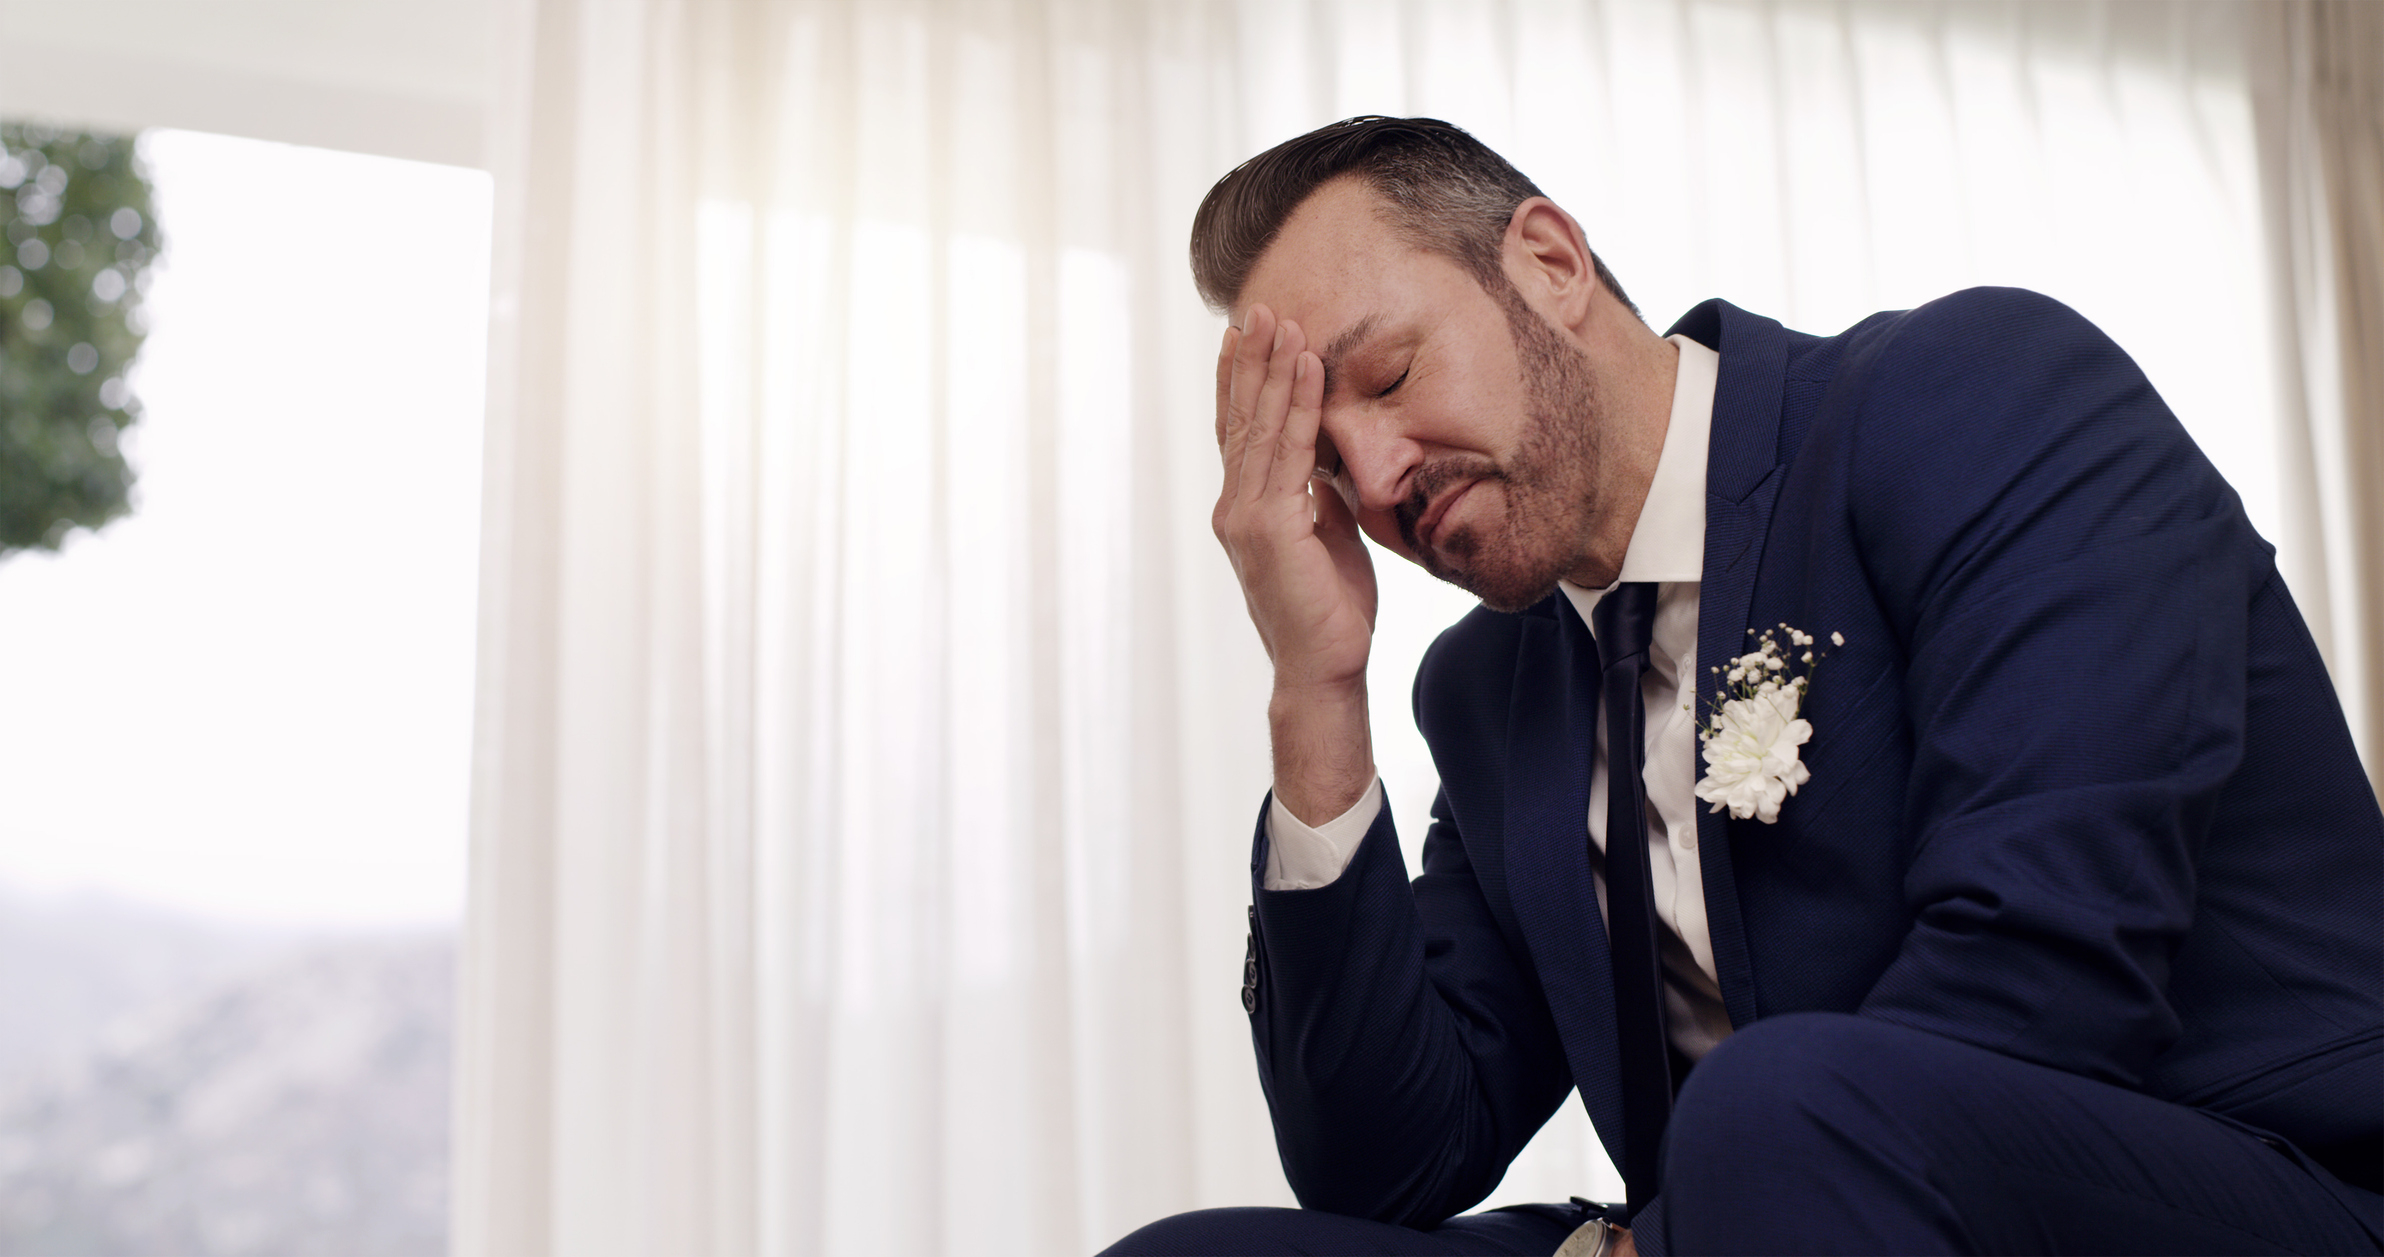 Groom in a suit with boutonniere sitting emotionally with his hand on his forehead